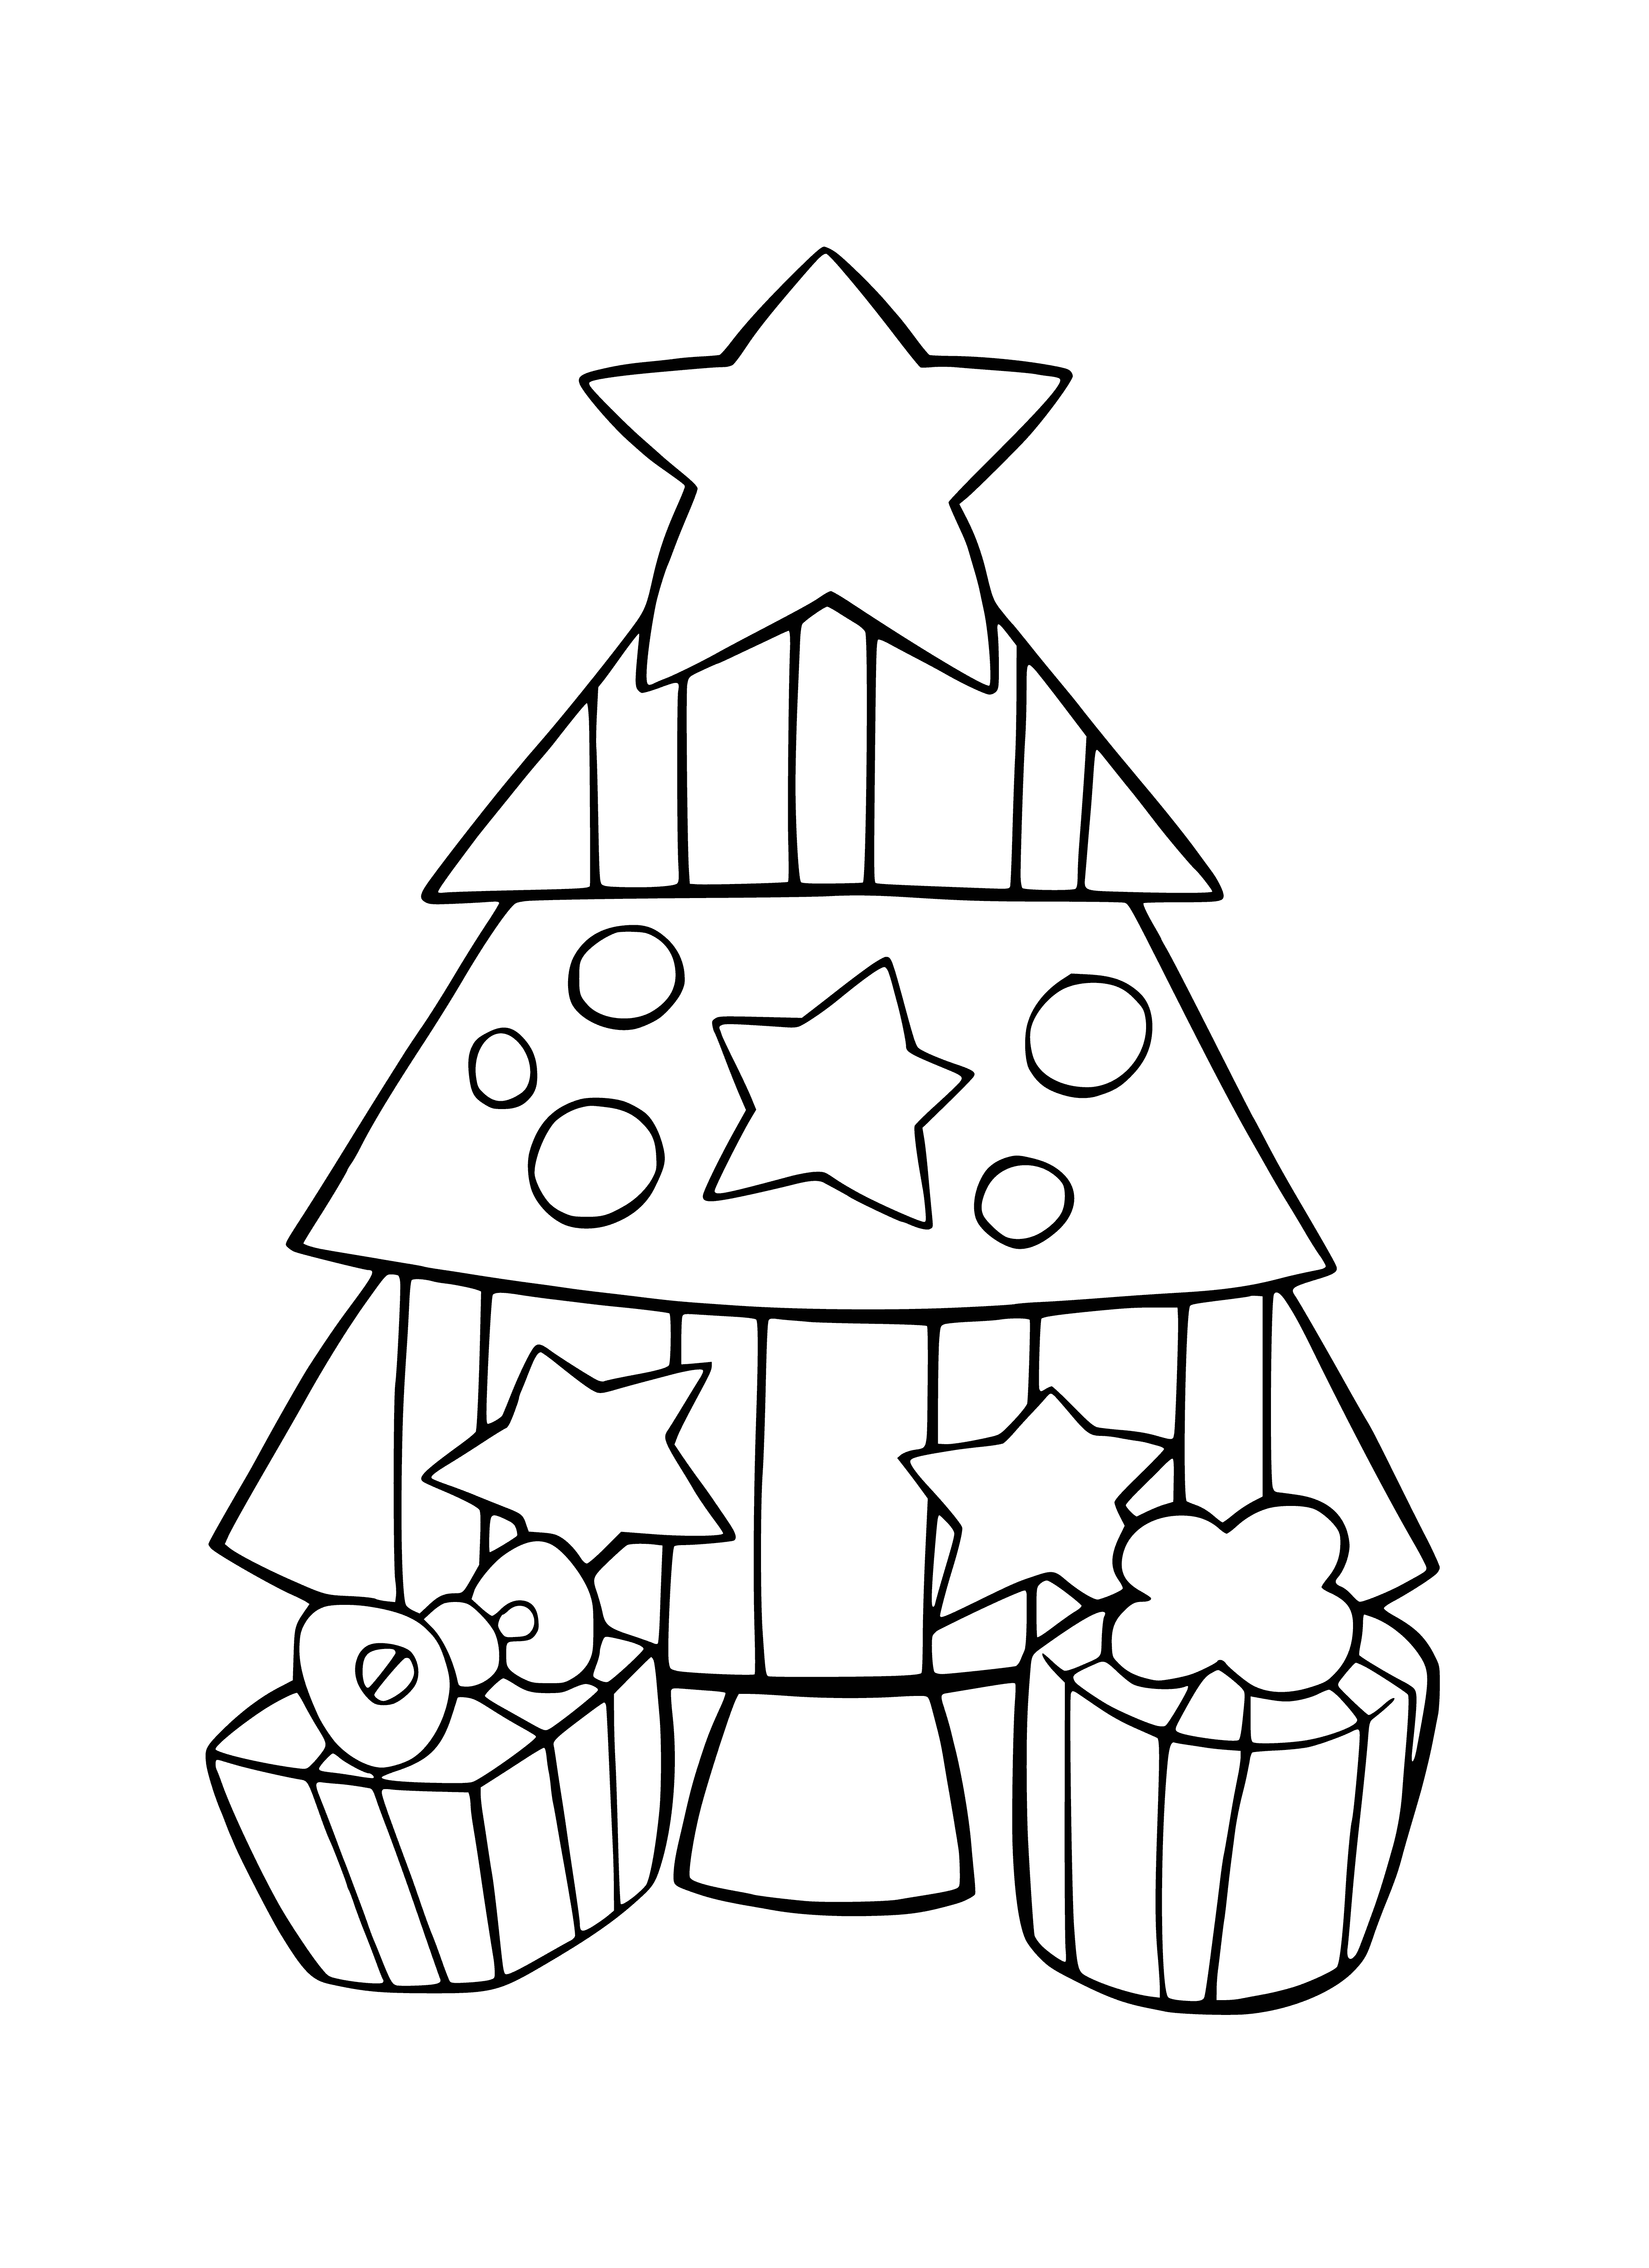 coloring page: Decorated Christmas tree with lights & ornaments, gifts wrapped & placed underneath.